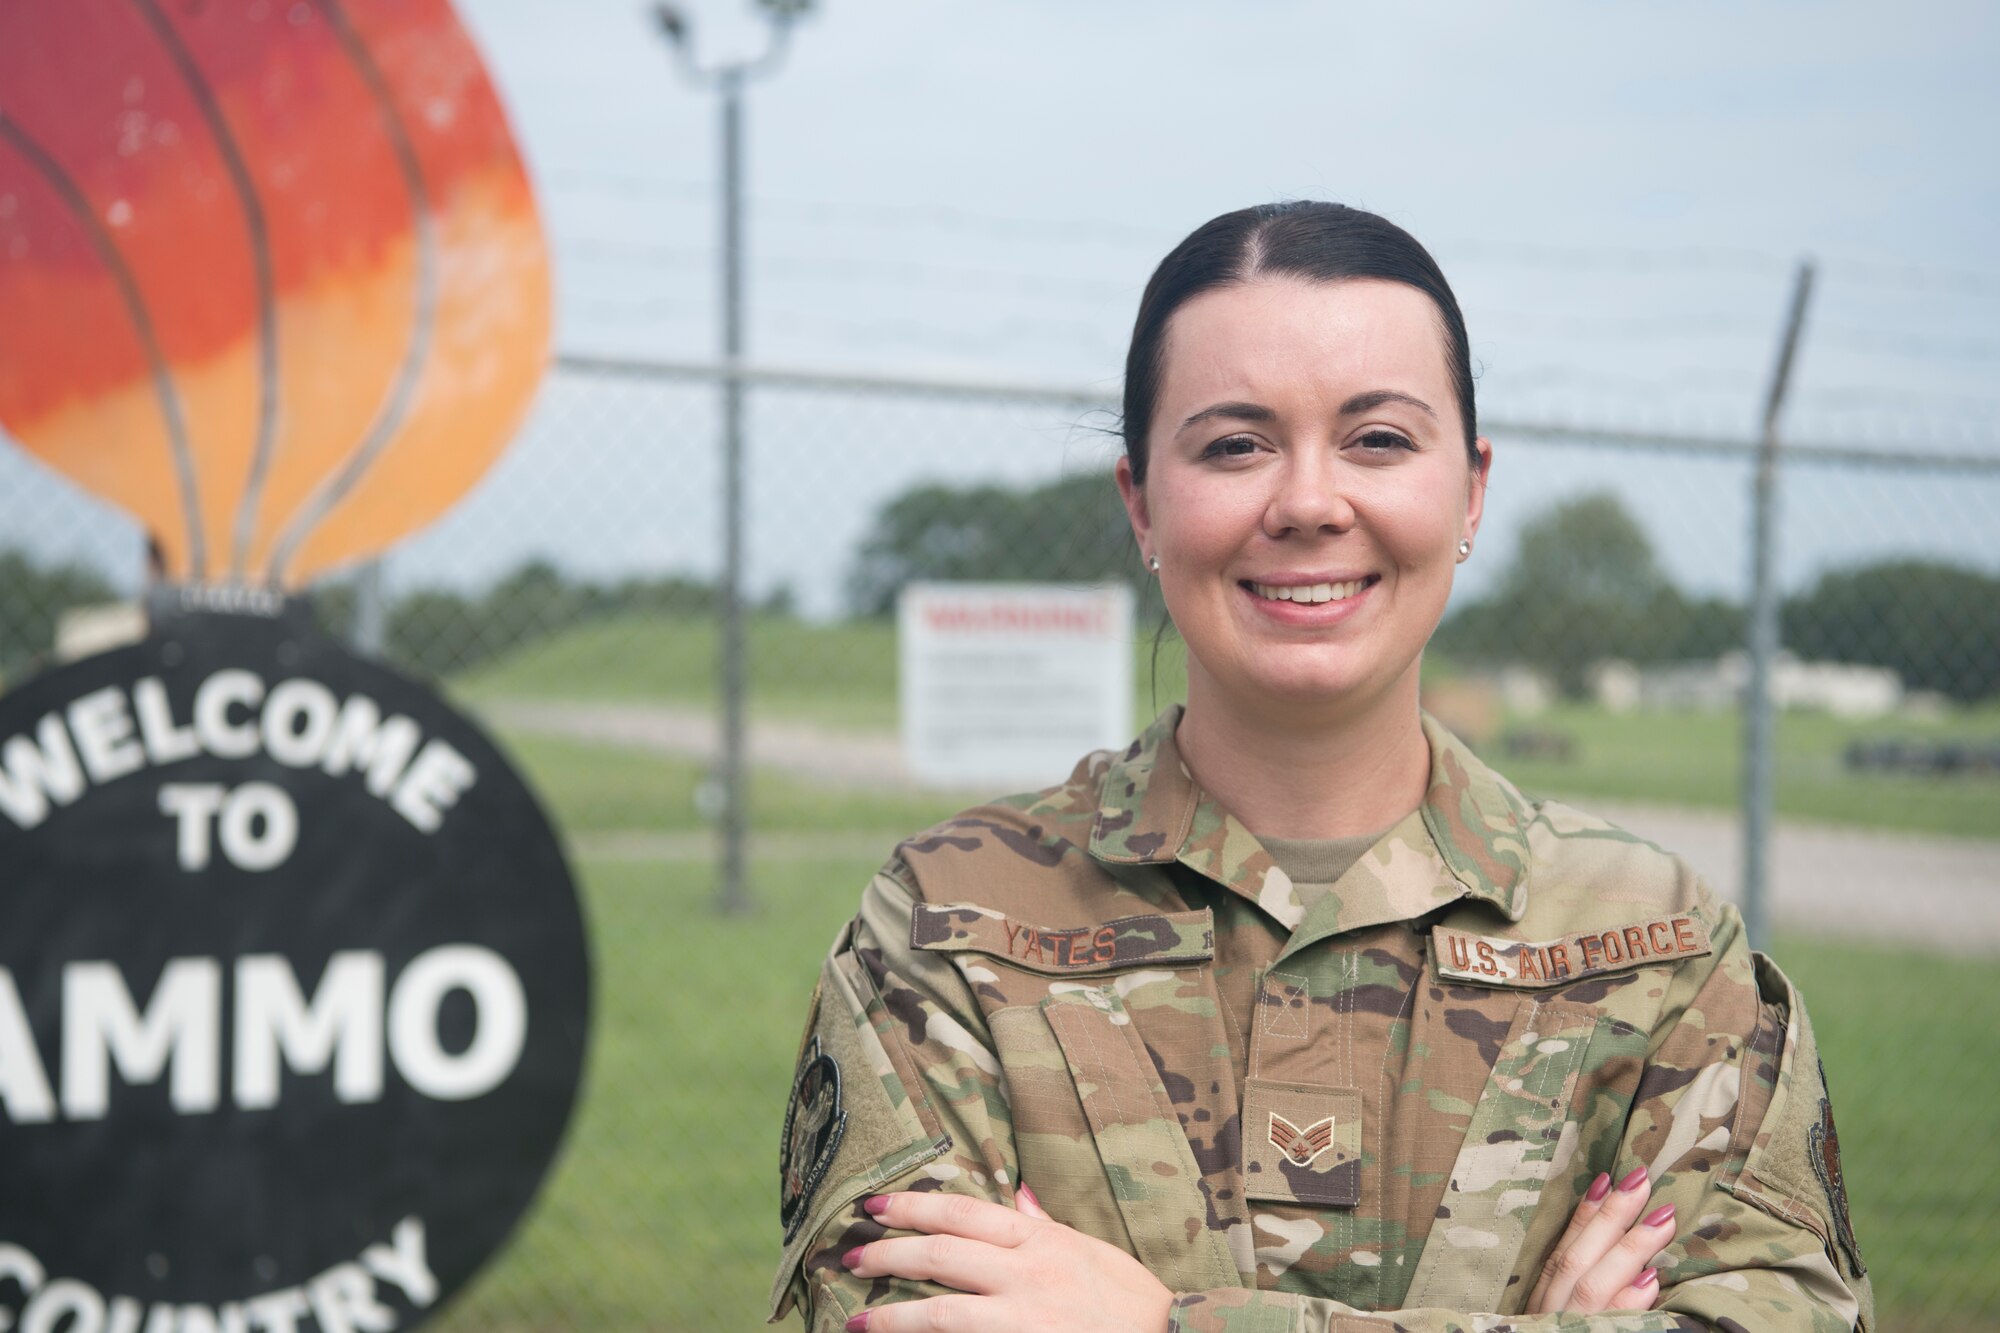 A female Airman poses for a photo